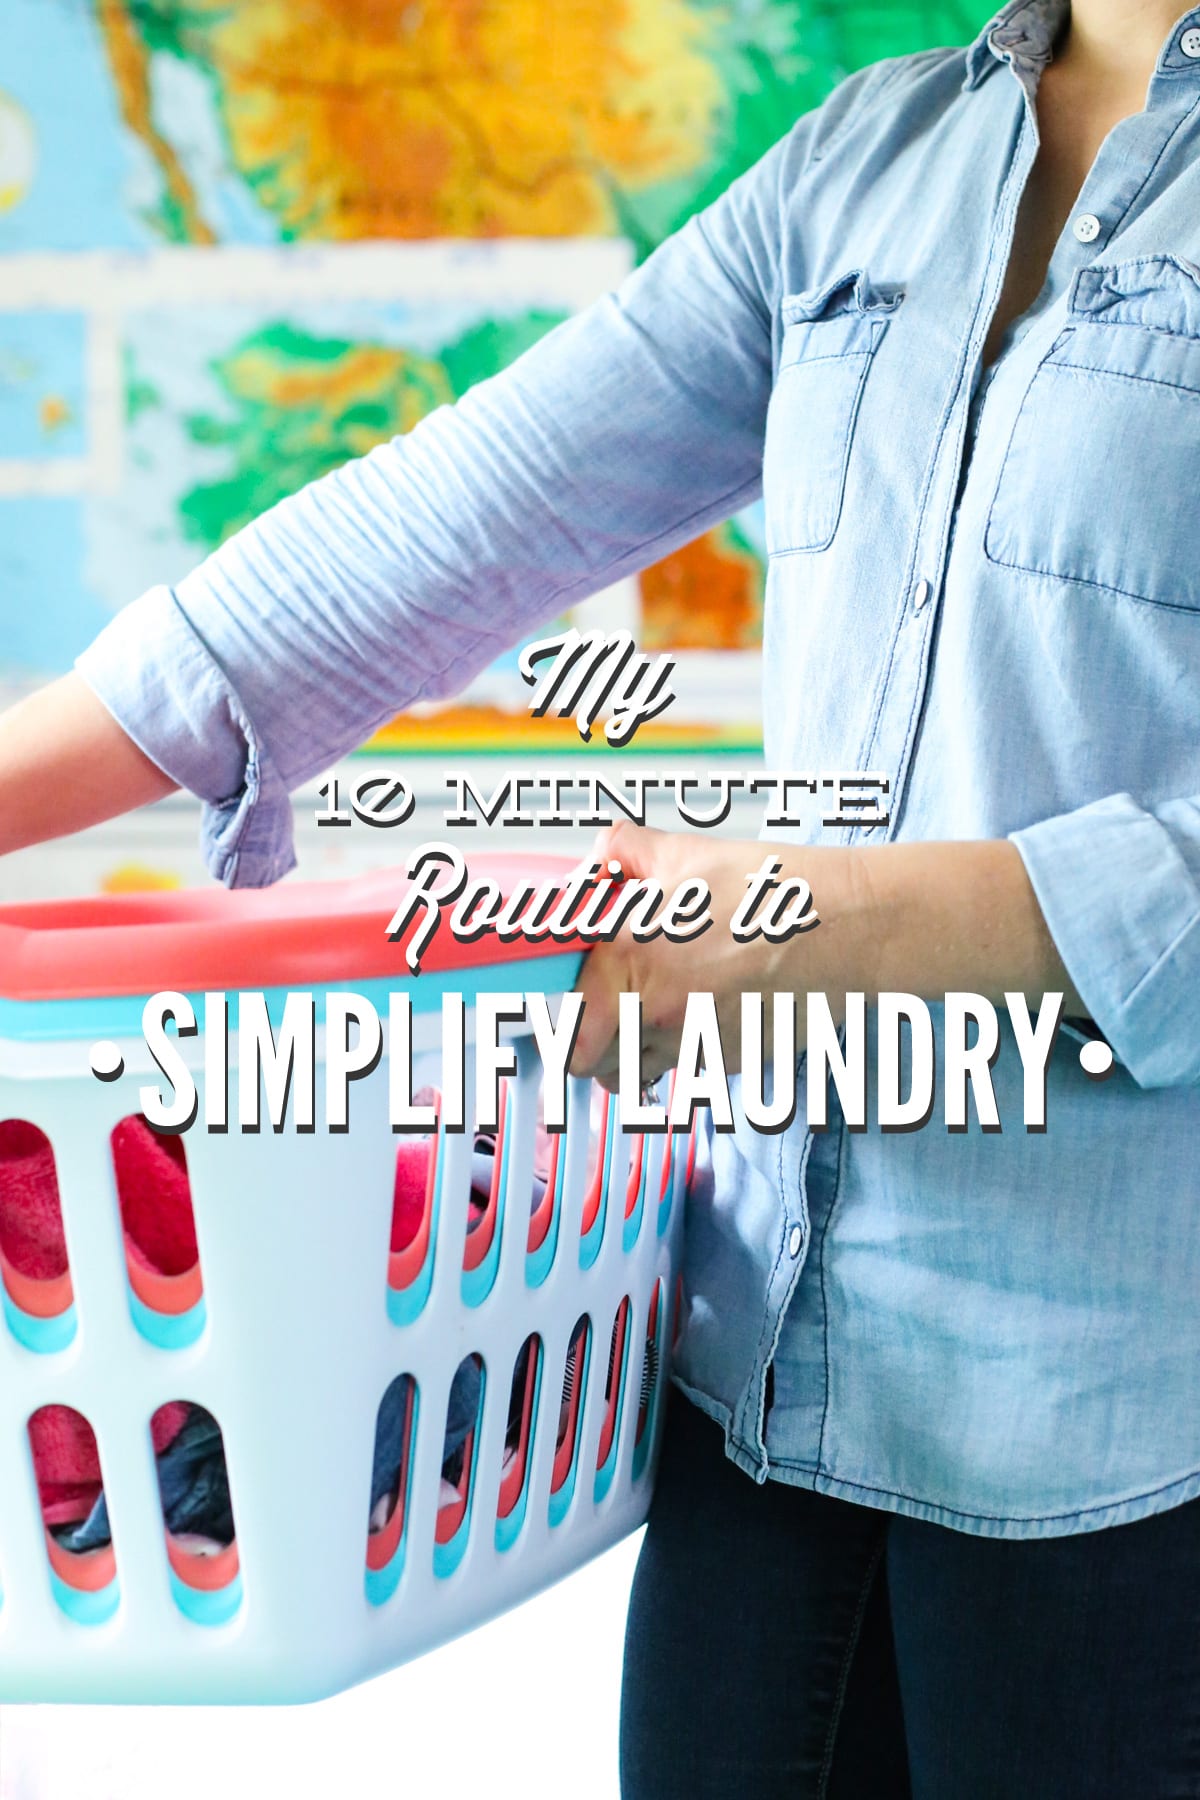 My 10 Minute Routine to Simplify Laundry